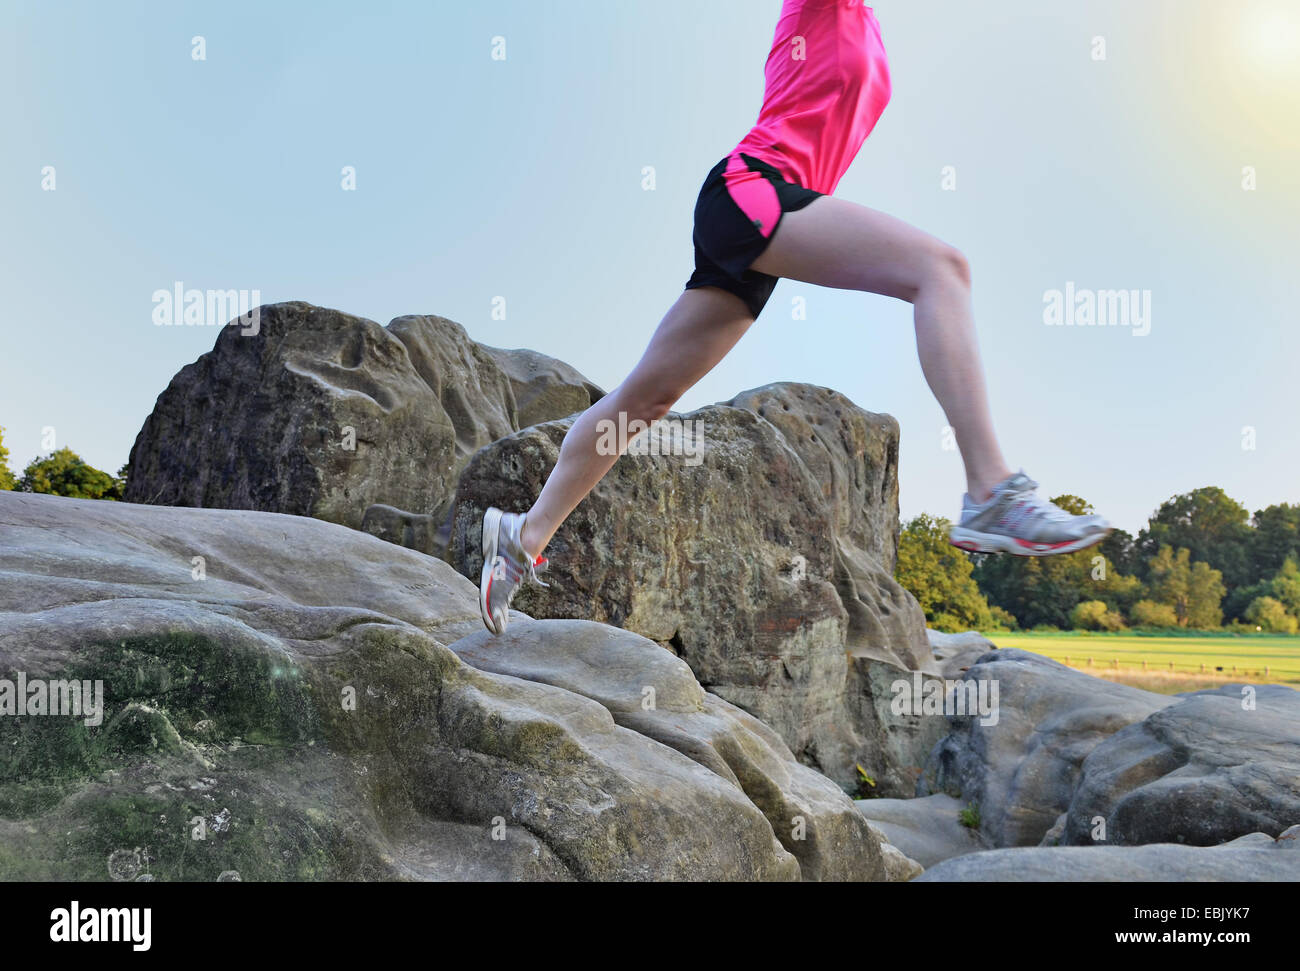 Neck down view of young female runner jumping over rock formation Stock Photo